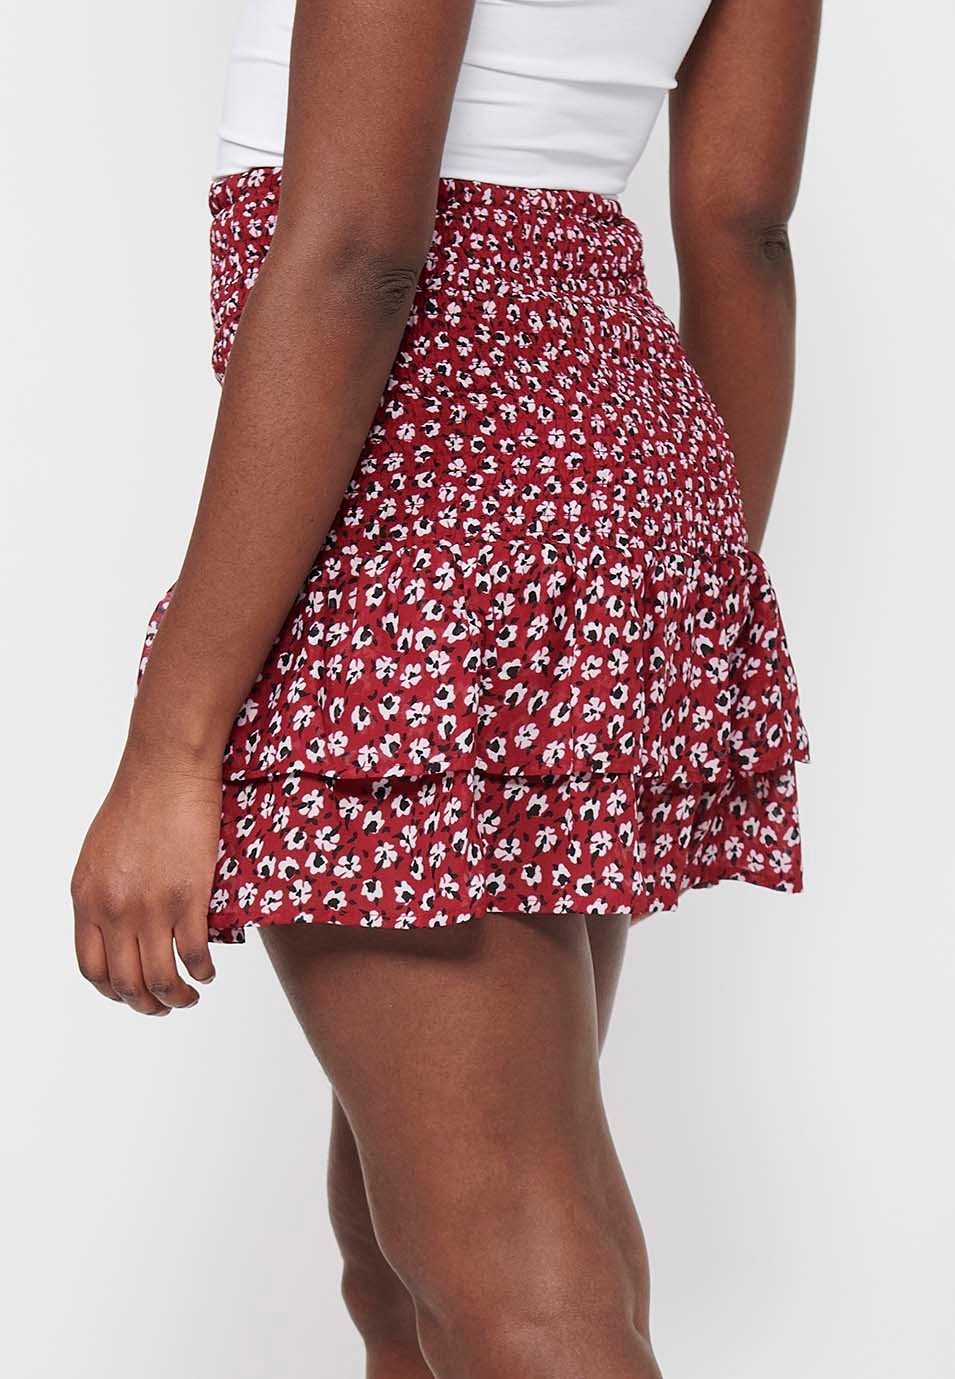 Short skirt with rubberized waist, red floral print for women